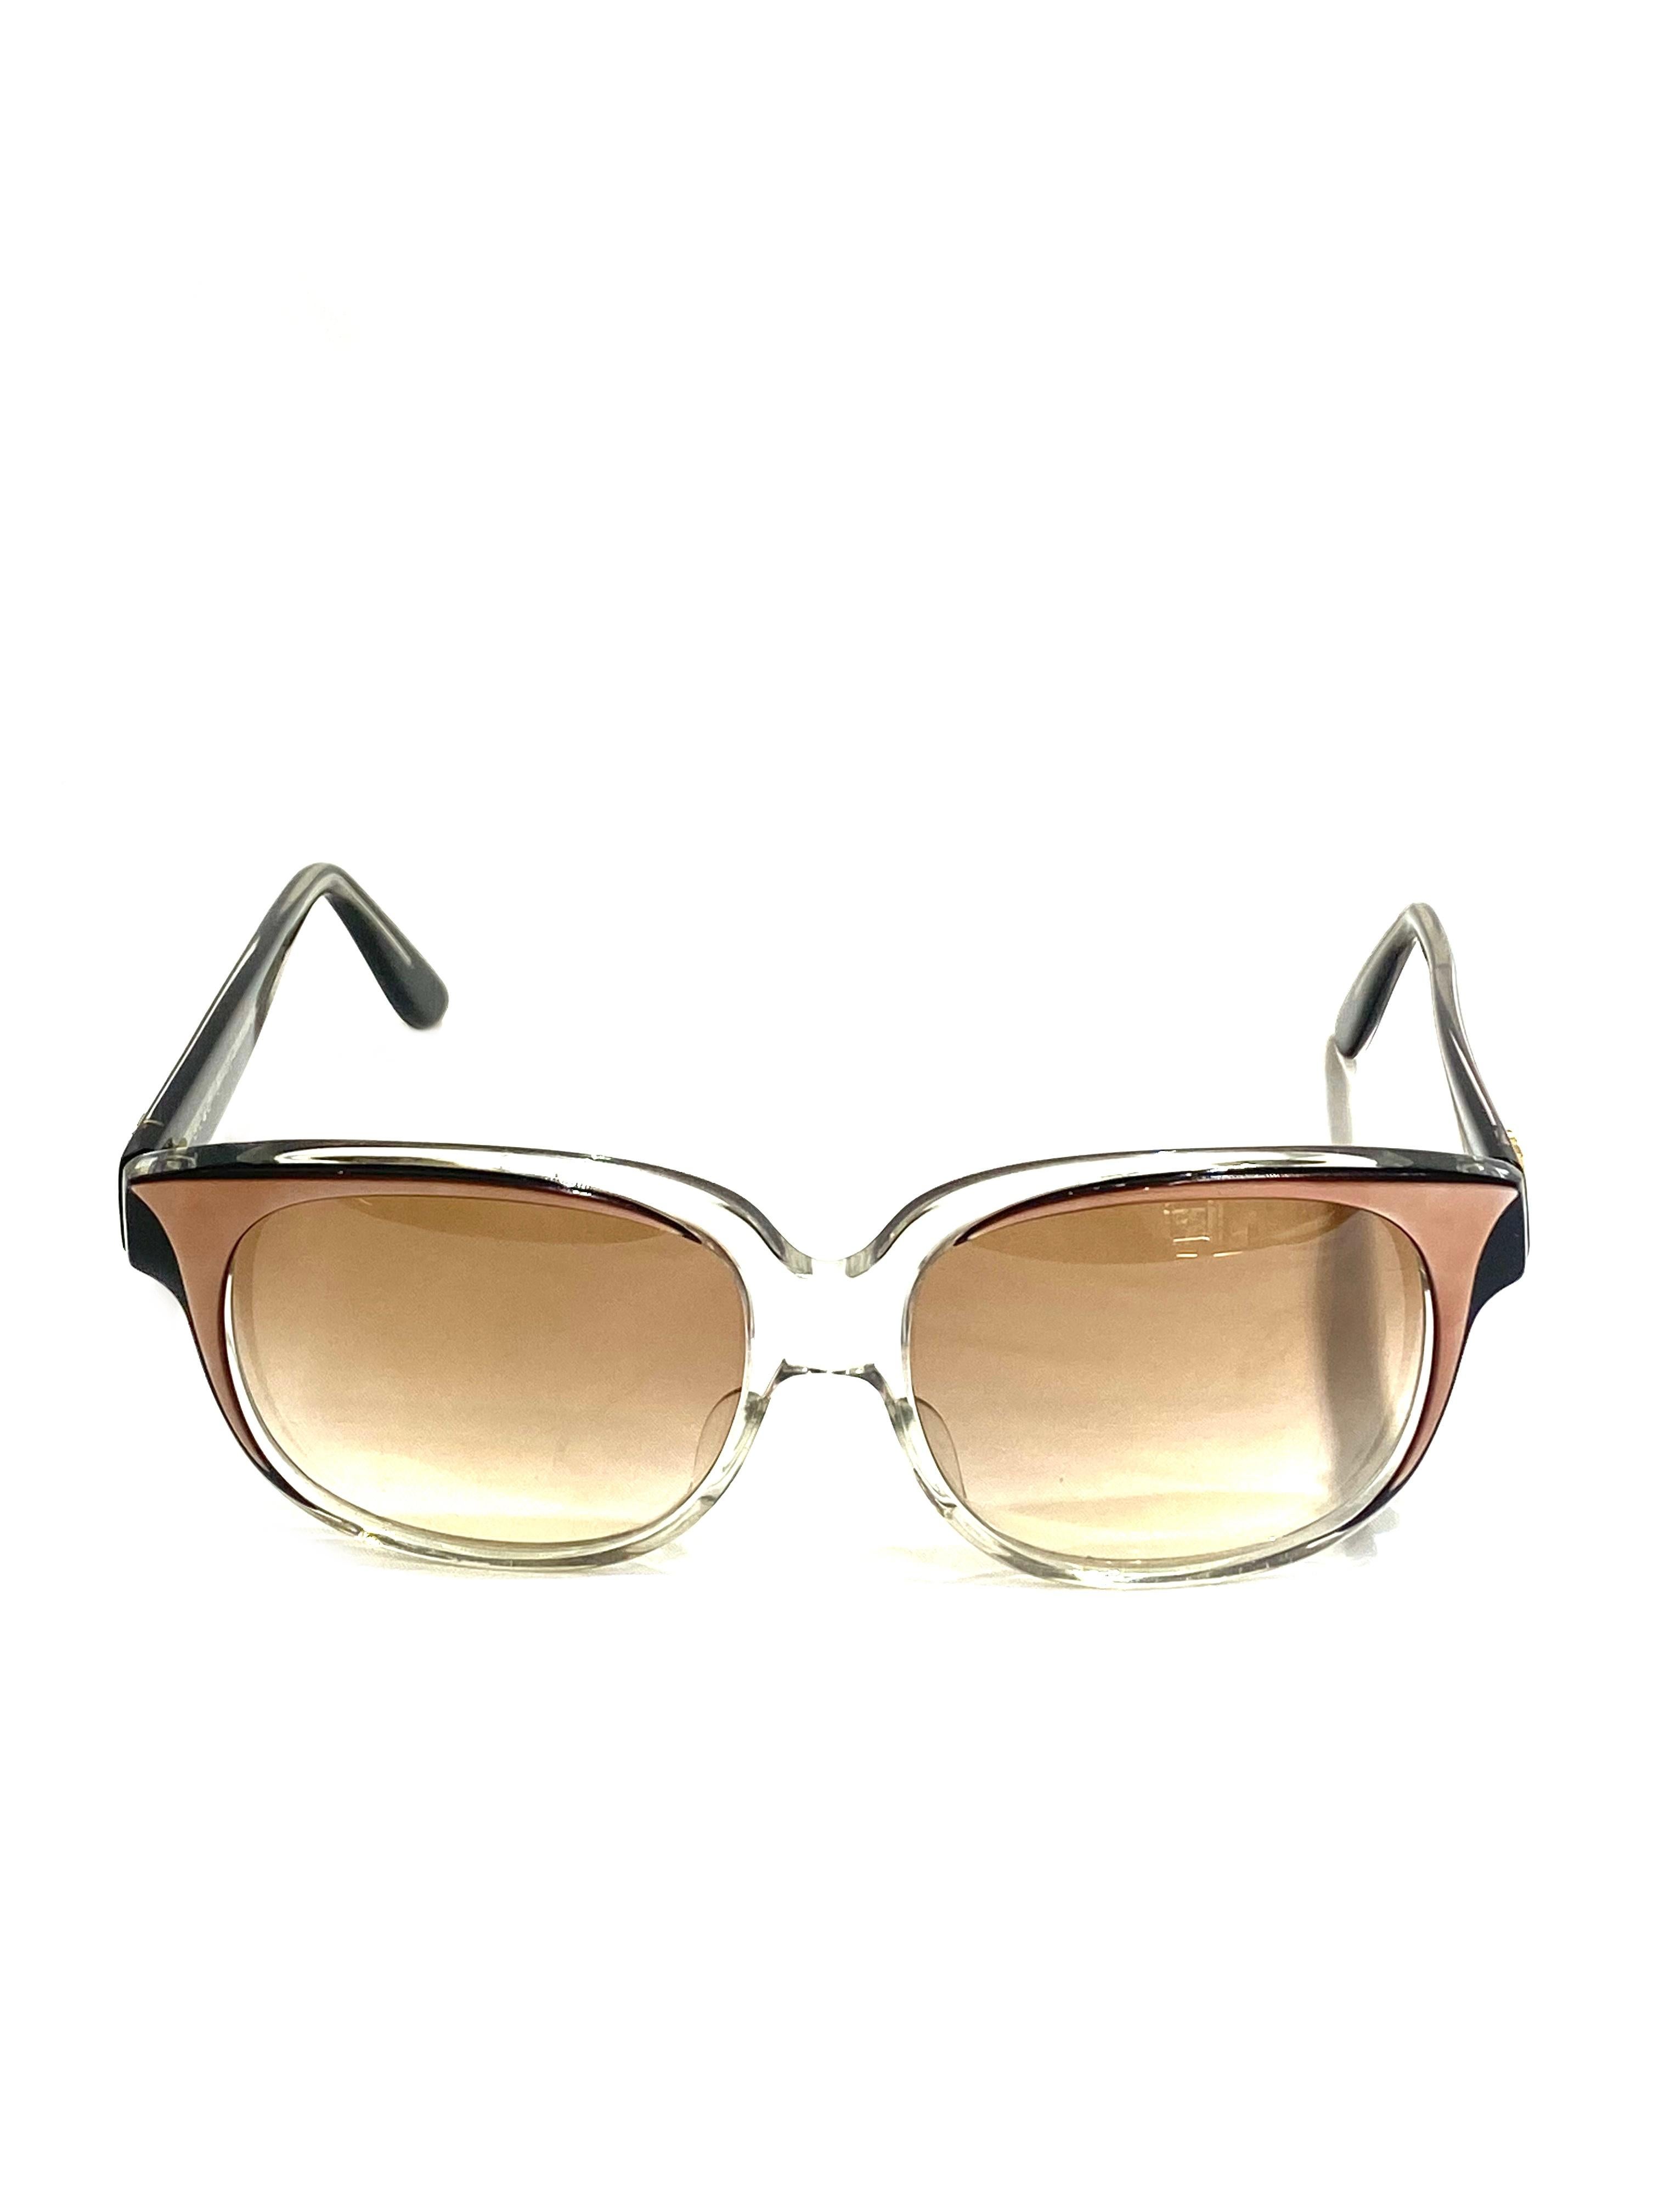 Product details:

Circa 1970.
Featuring clear, black and brown frame with round square brown gradient lens and gold tone EK signature on the sides.
Signed Emmanuelle Khanh Paris B. Robinson.
Handmade in France. 